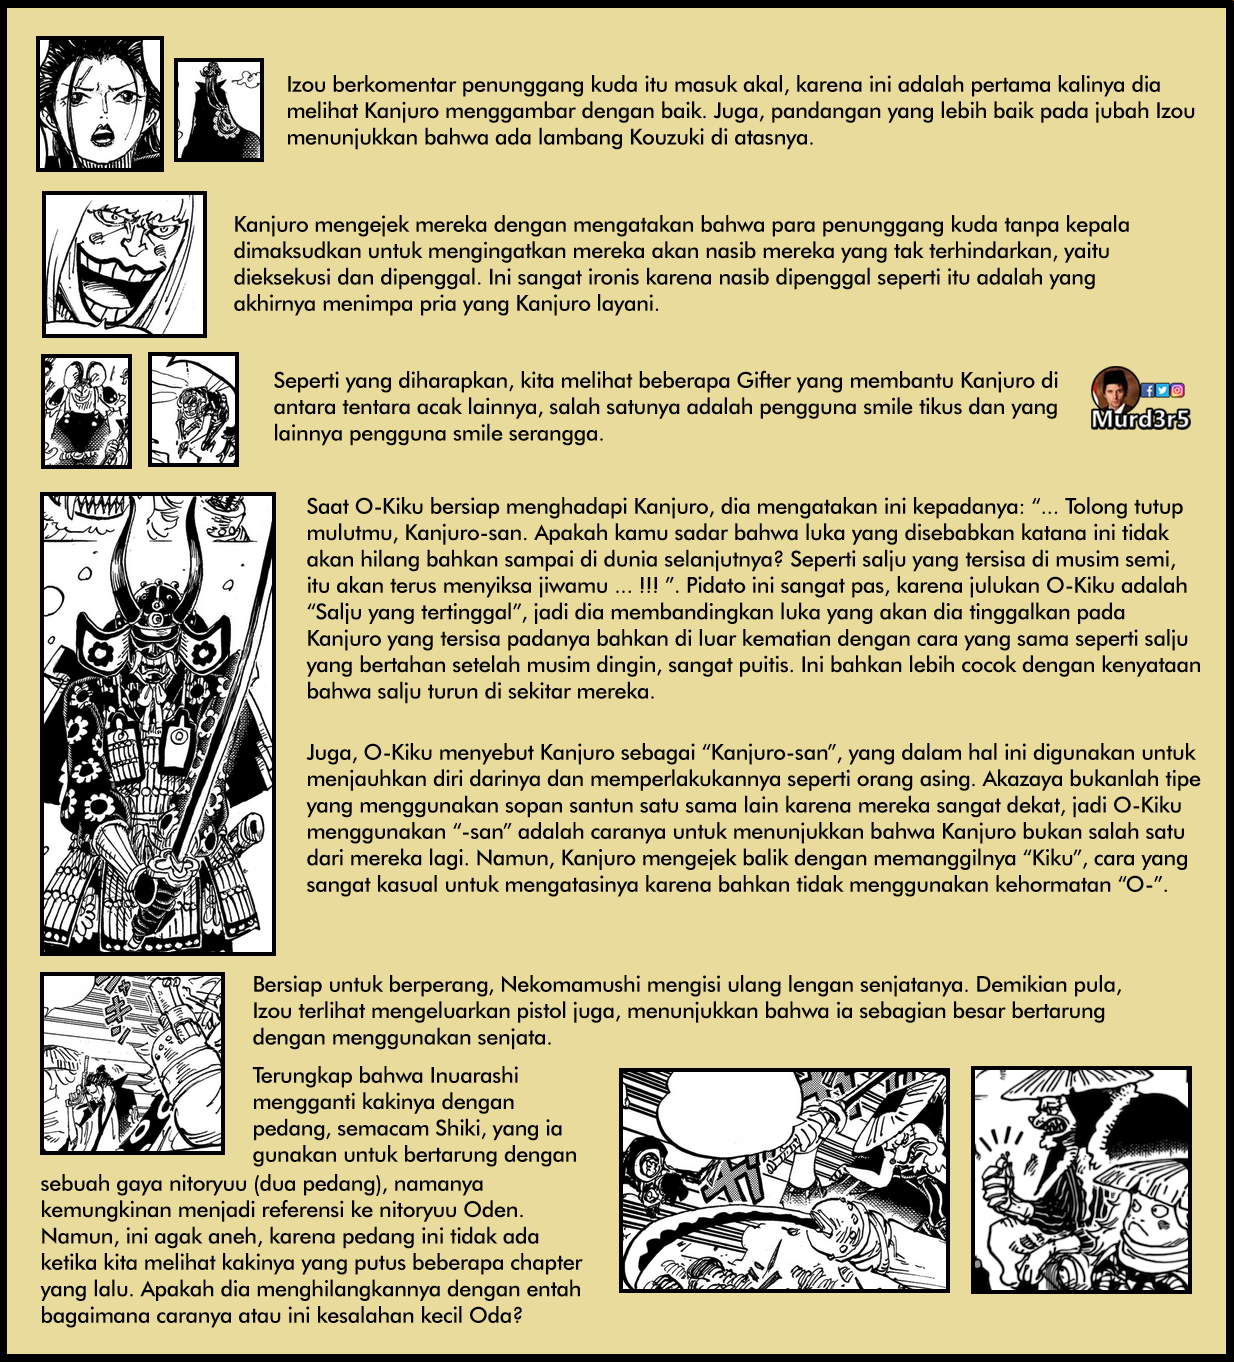 one-piece-chapter-985-in-depth-analysis-2